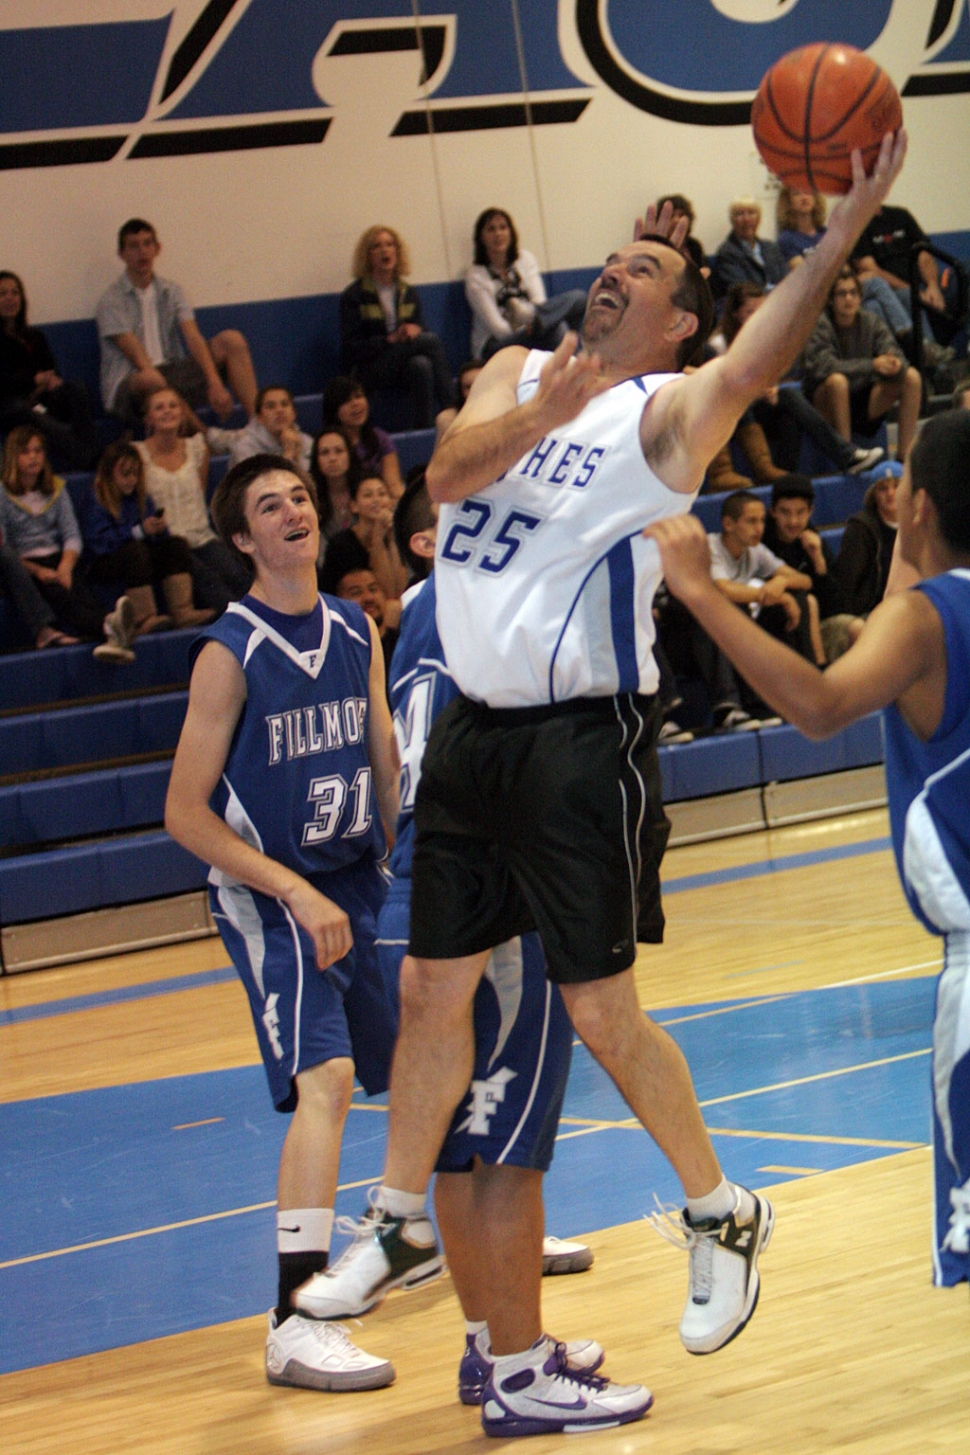 F.H.S. Principal John WIlber goes in for 2 points during the alumni basketball game this past Saturday. Varsity went on to win.